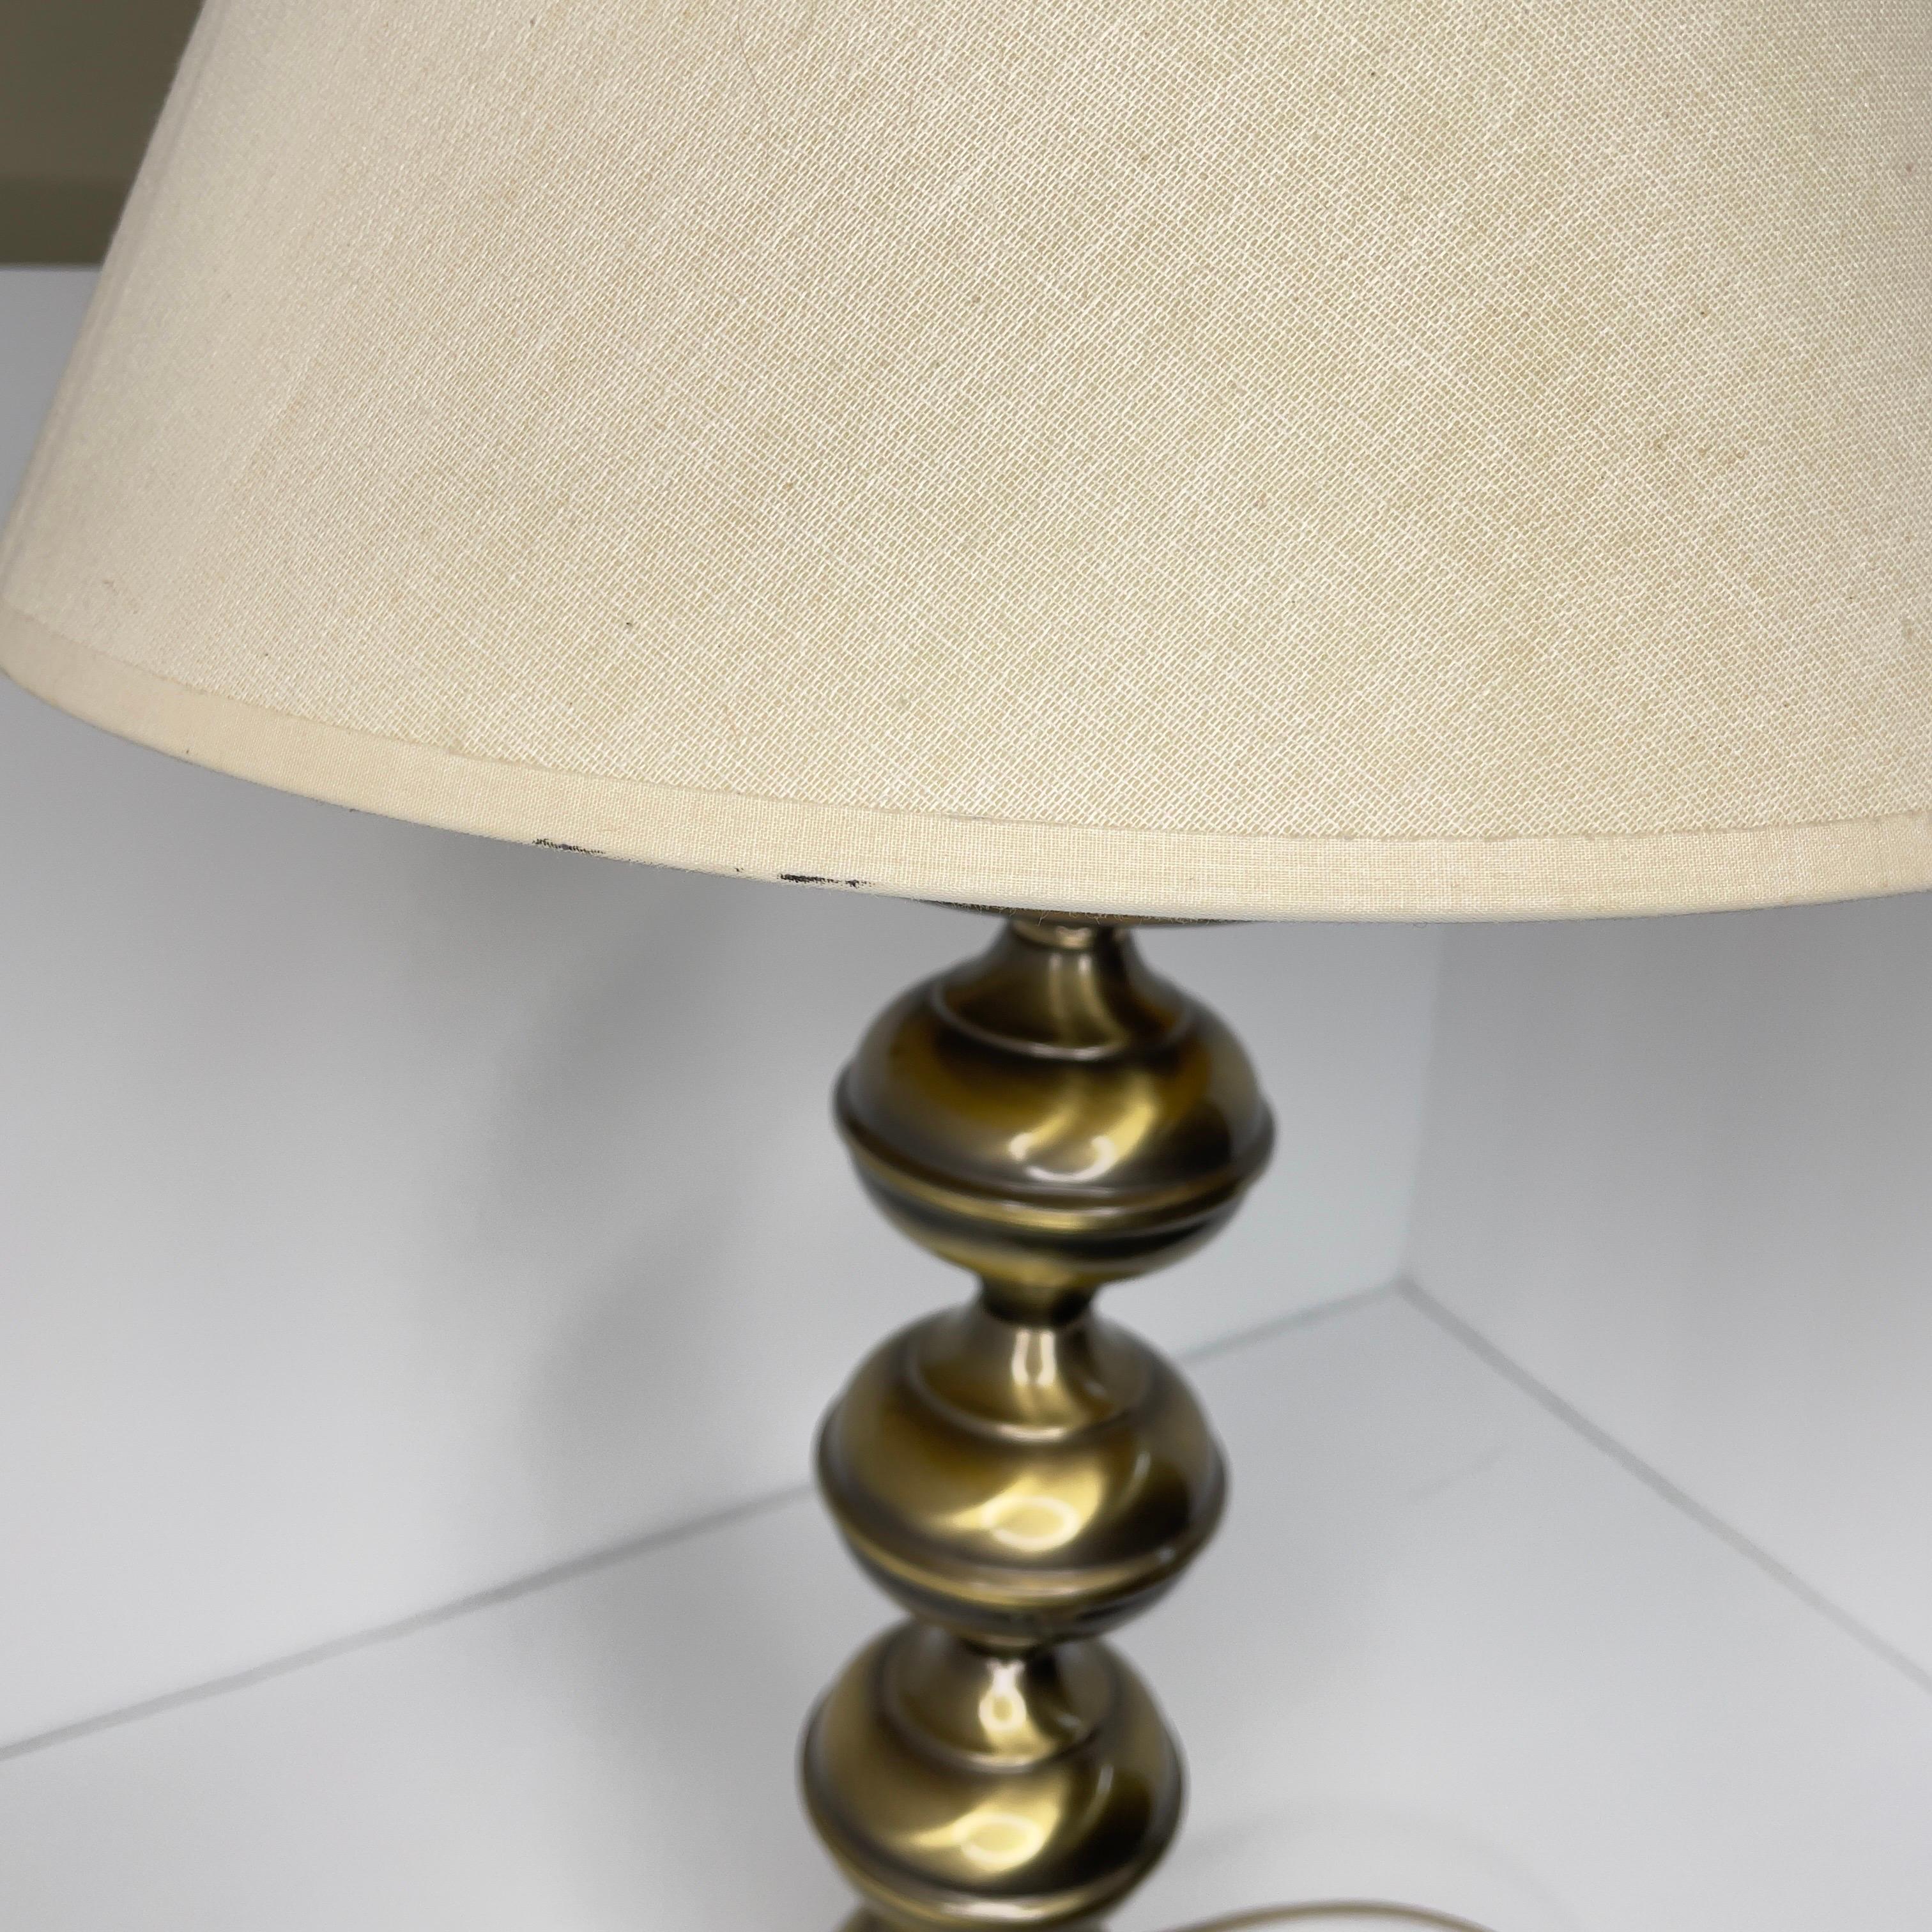 Mid Century Modern Brass Turned Table Lamp With Shade- 2 Pieces For Sale 4